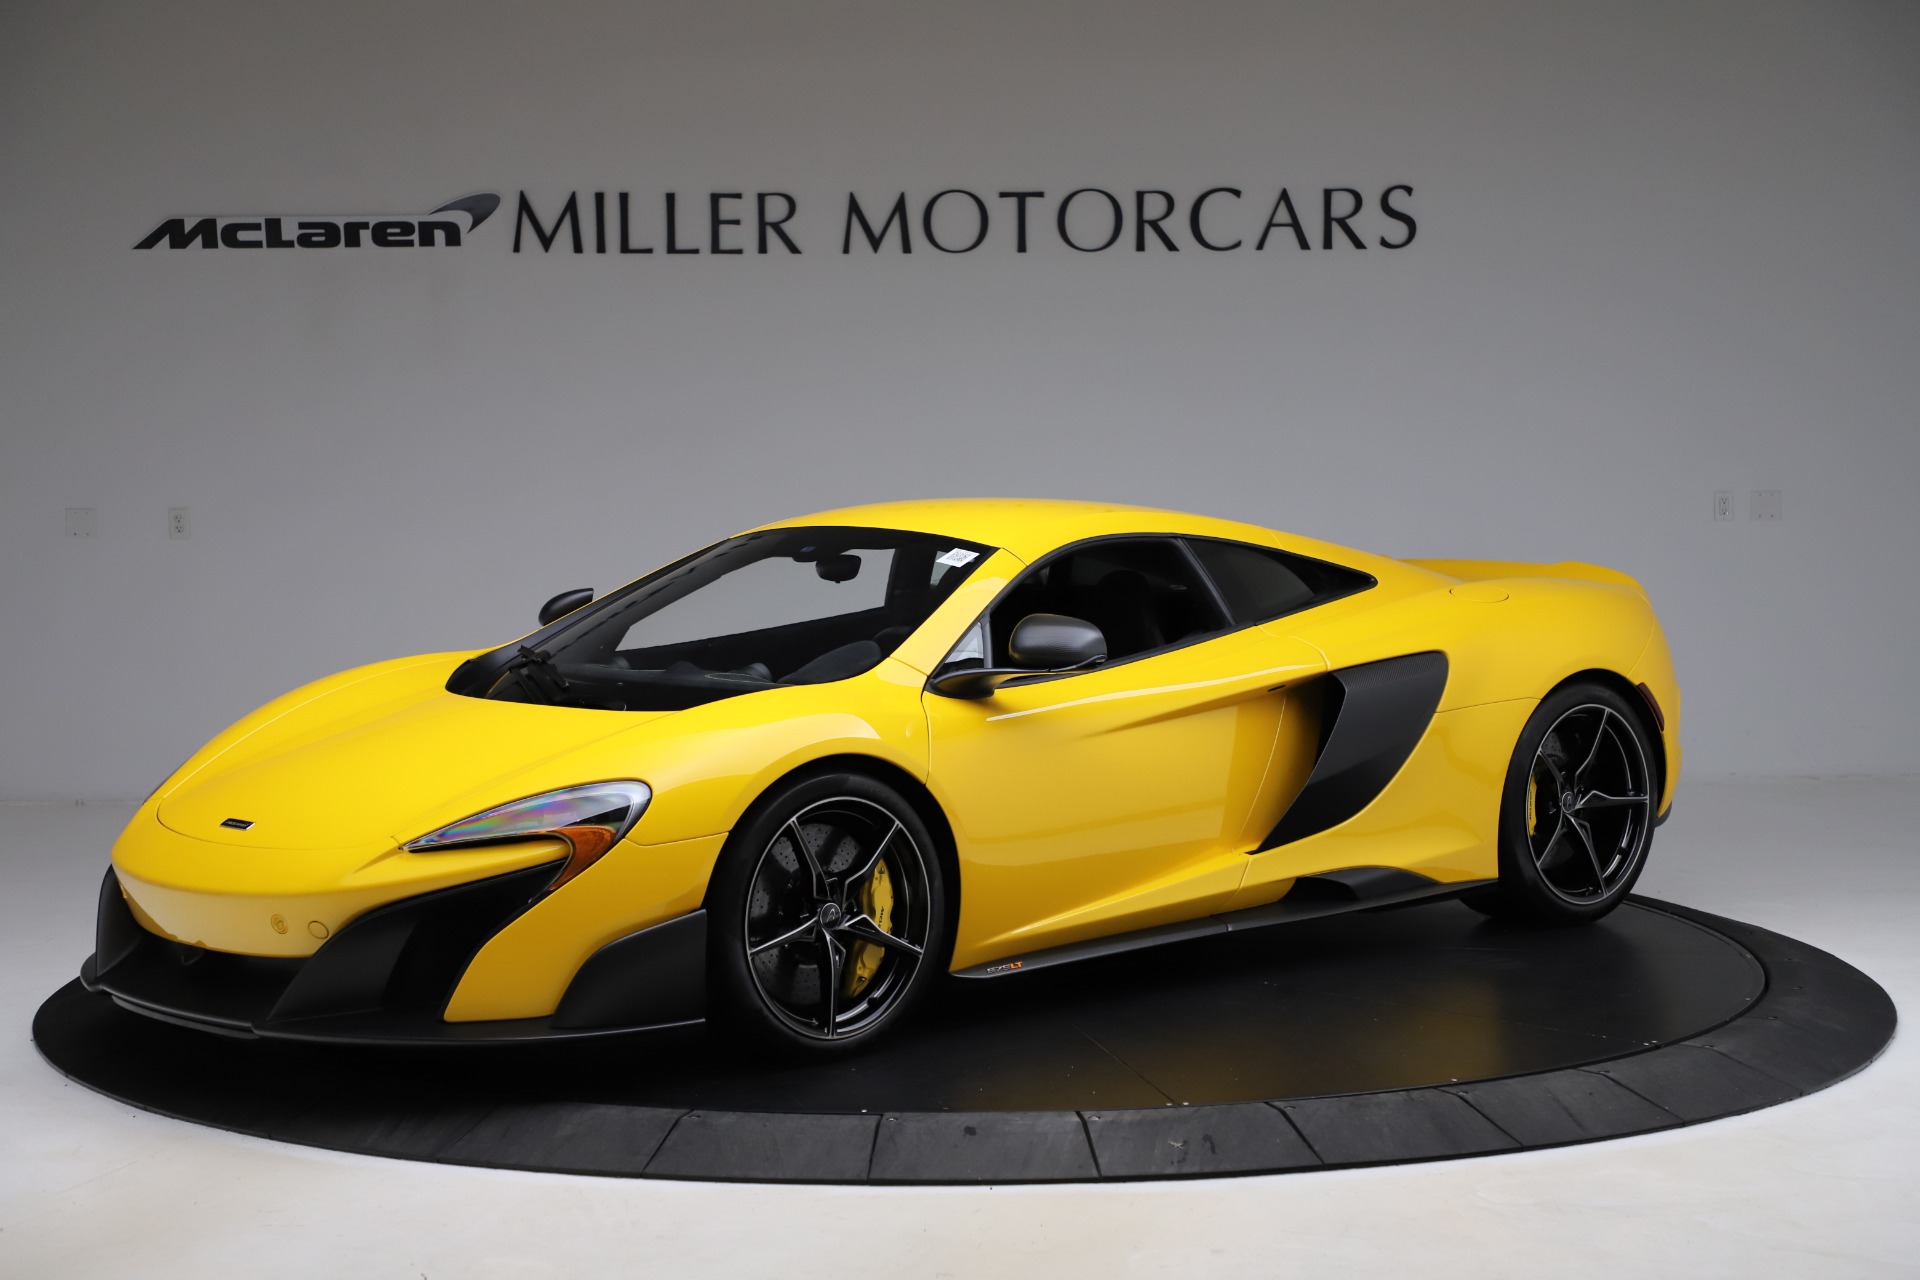 Used 2016 McLaren 675LT for sale Sold at Bentley Greenwich in Greenwich CT 06830 1